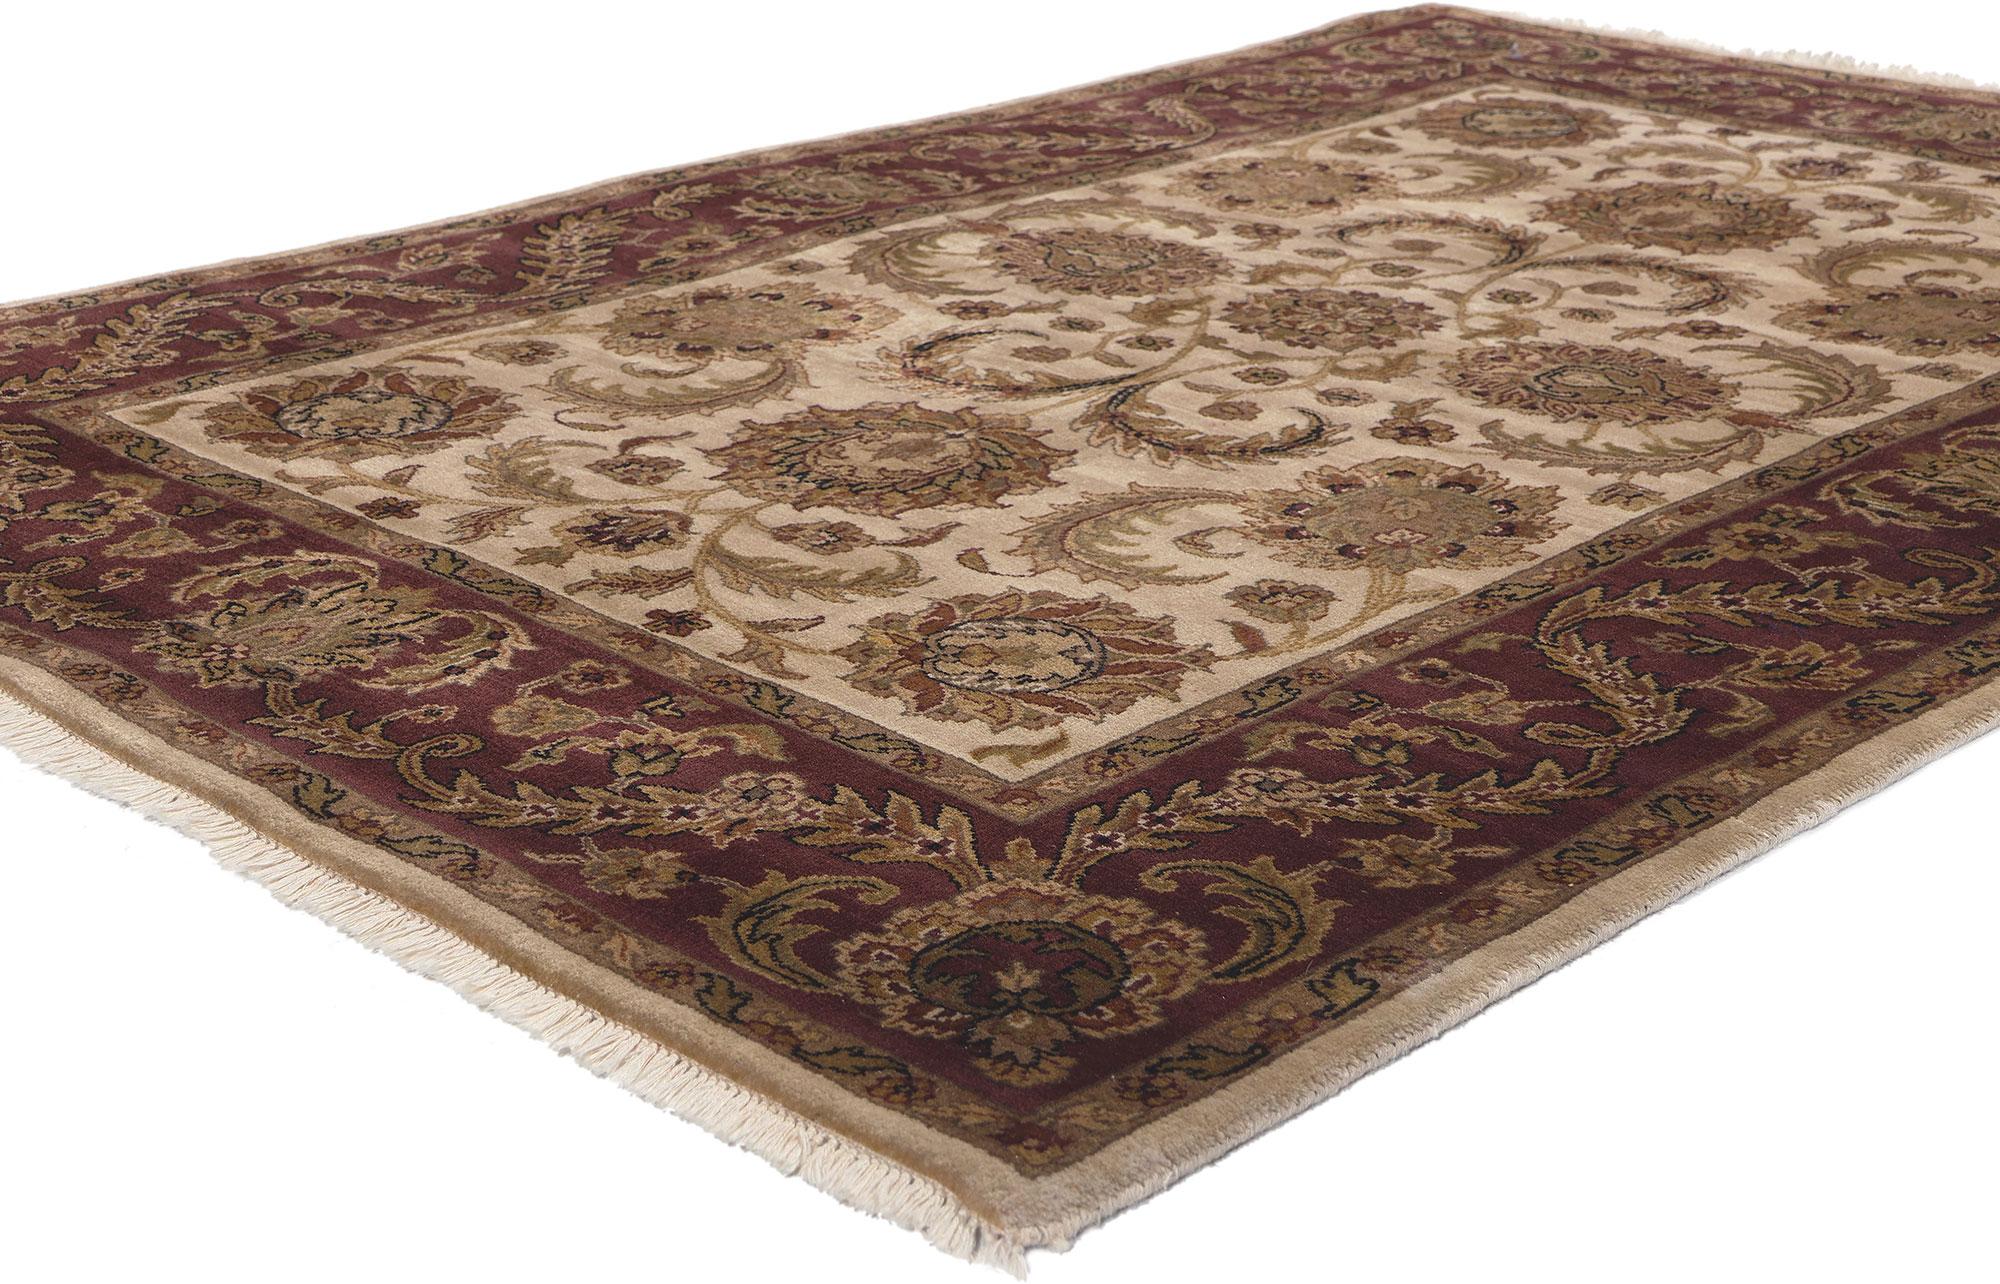 78692 Earth-Tone Vintage Indian Rug, 04'01 x 06'01.  Immerse yourself in the enduring charm of Biophilic Design and the intricate decorative craftsmanship showcased in this hand-knotted wool vintage Indian rug. Seamlessly blending captivating